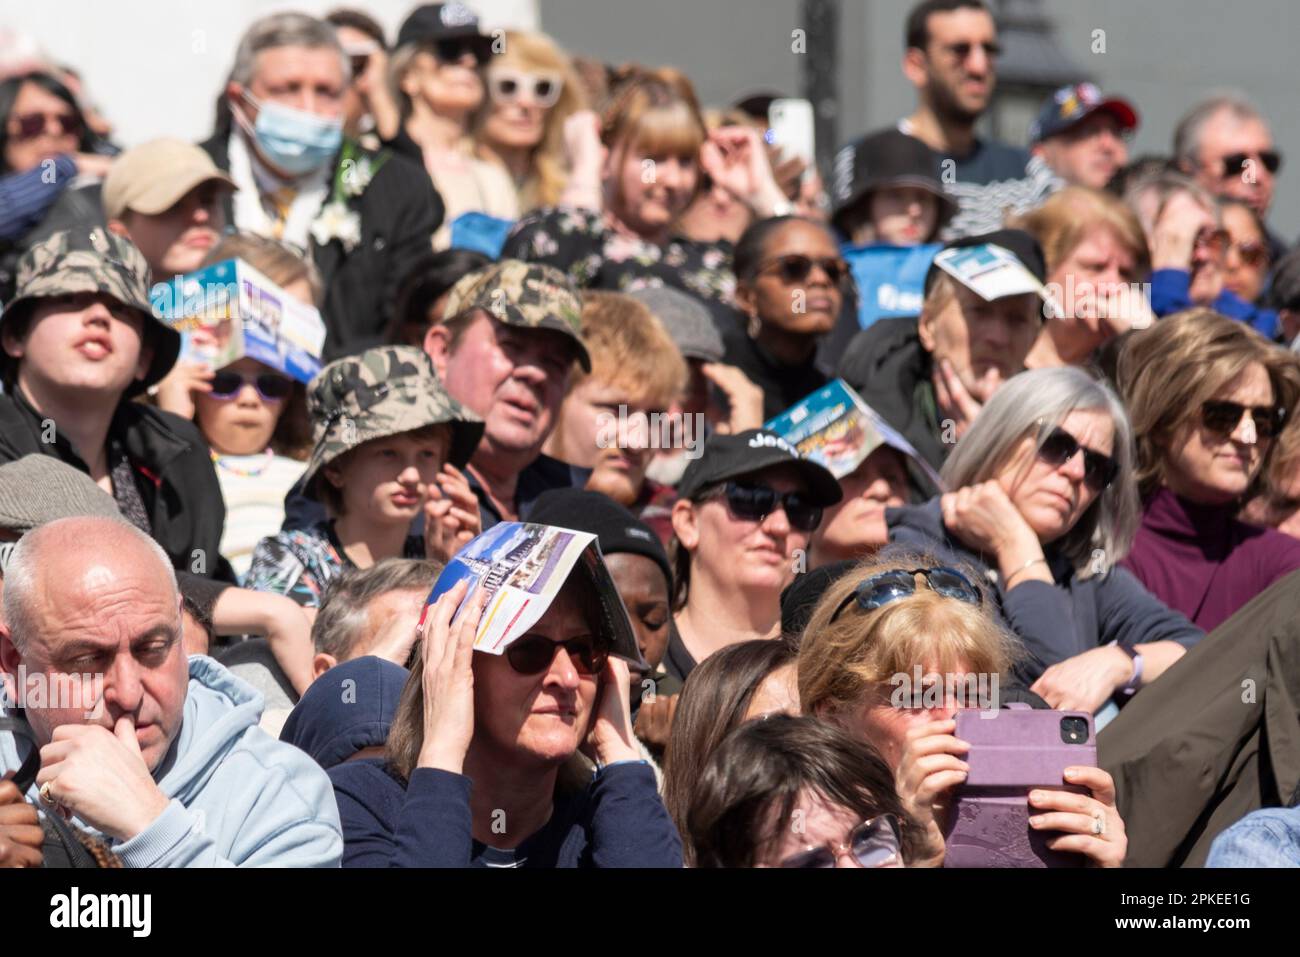 Trafalgar Square, Westminster, London, UK. 7th Apr, 2023. The day has begun warm and sunny, with people using event programmes for shade during the performance of The Passion of Jesus in Trafalgar Square. Free public event. Stock Photo